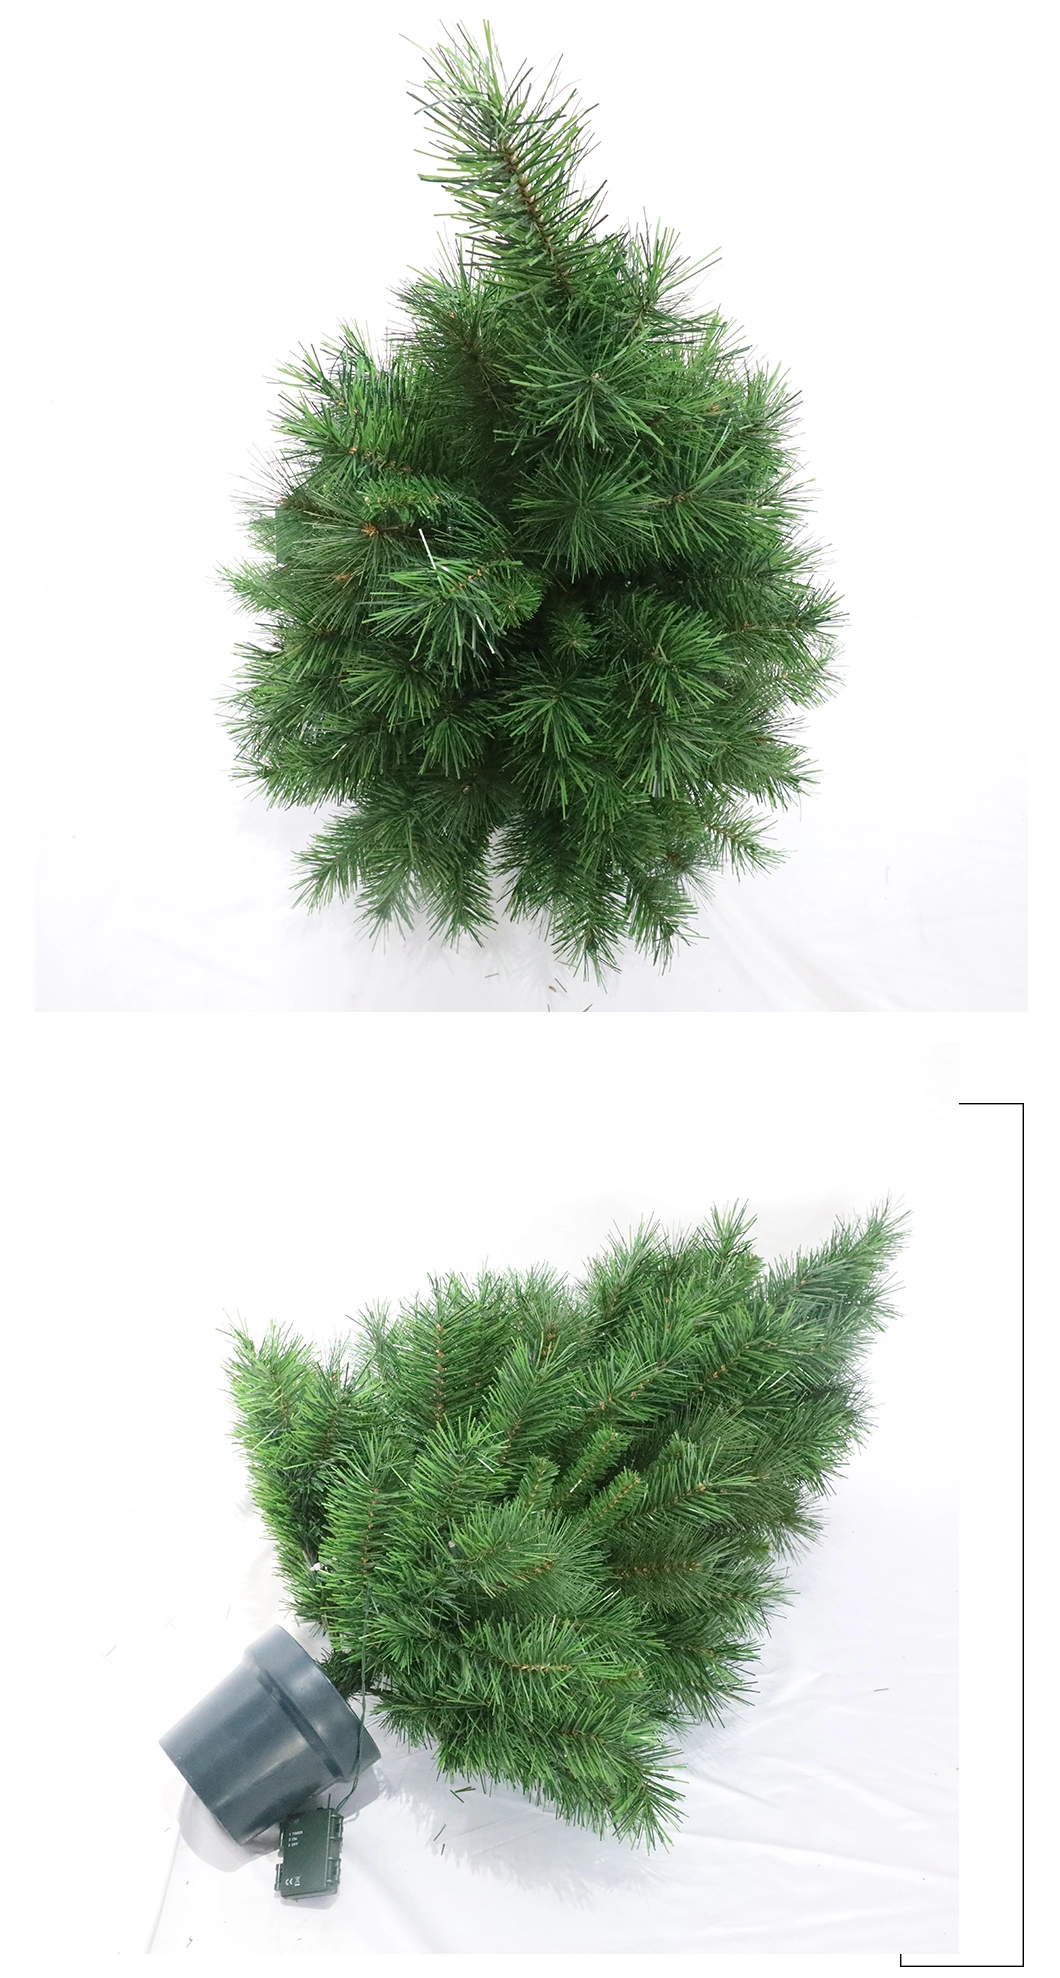 Artificial Xmas Pine Needle Tree with Plastic Pot St7684